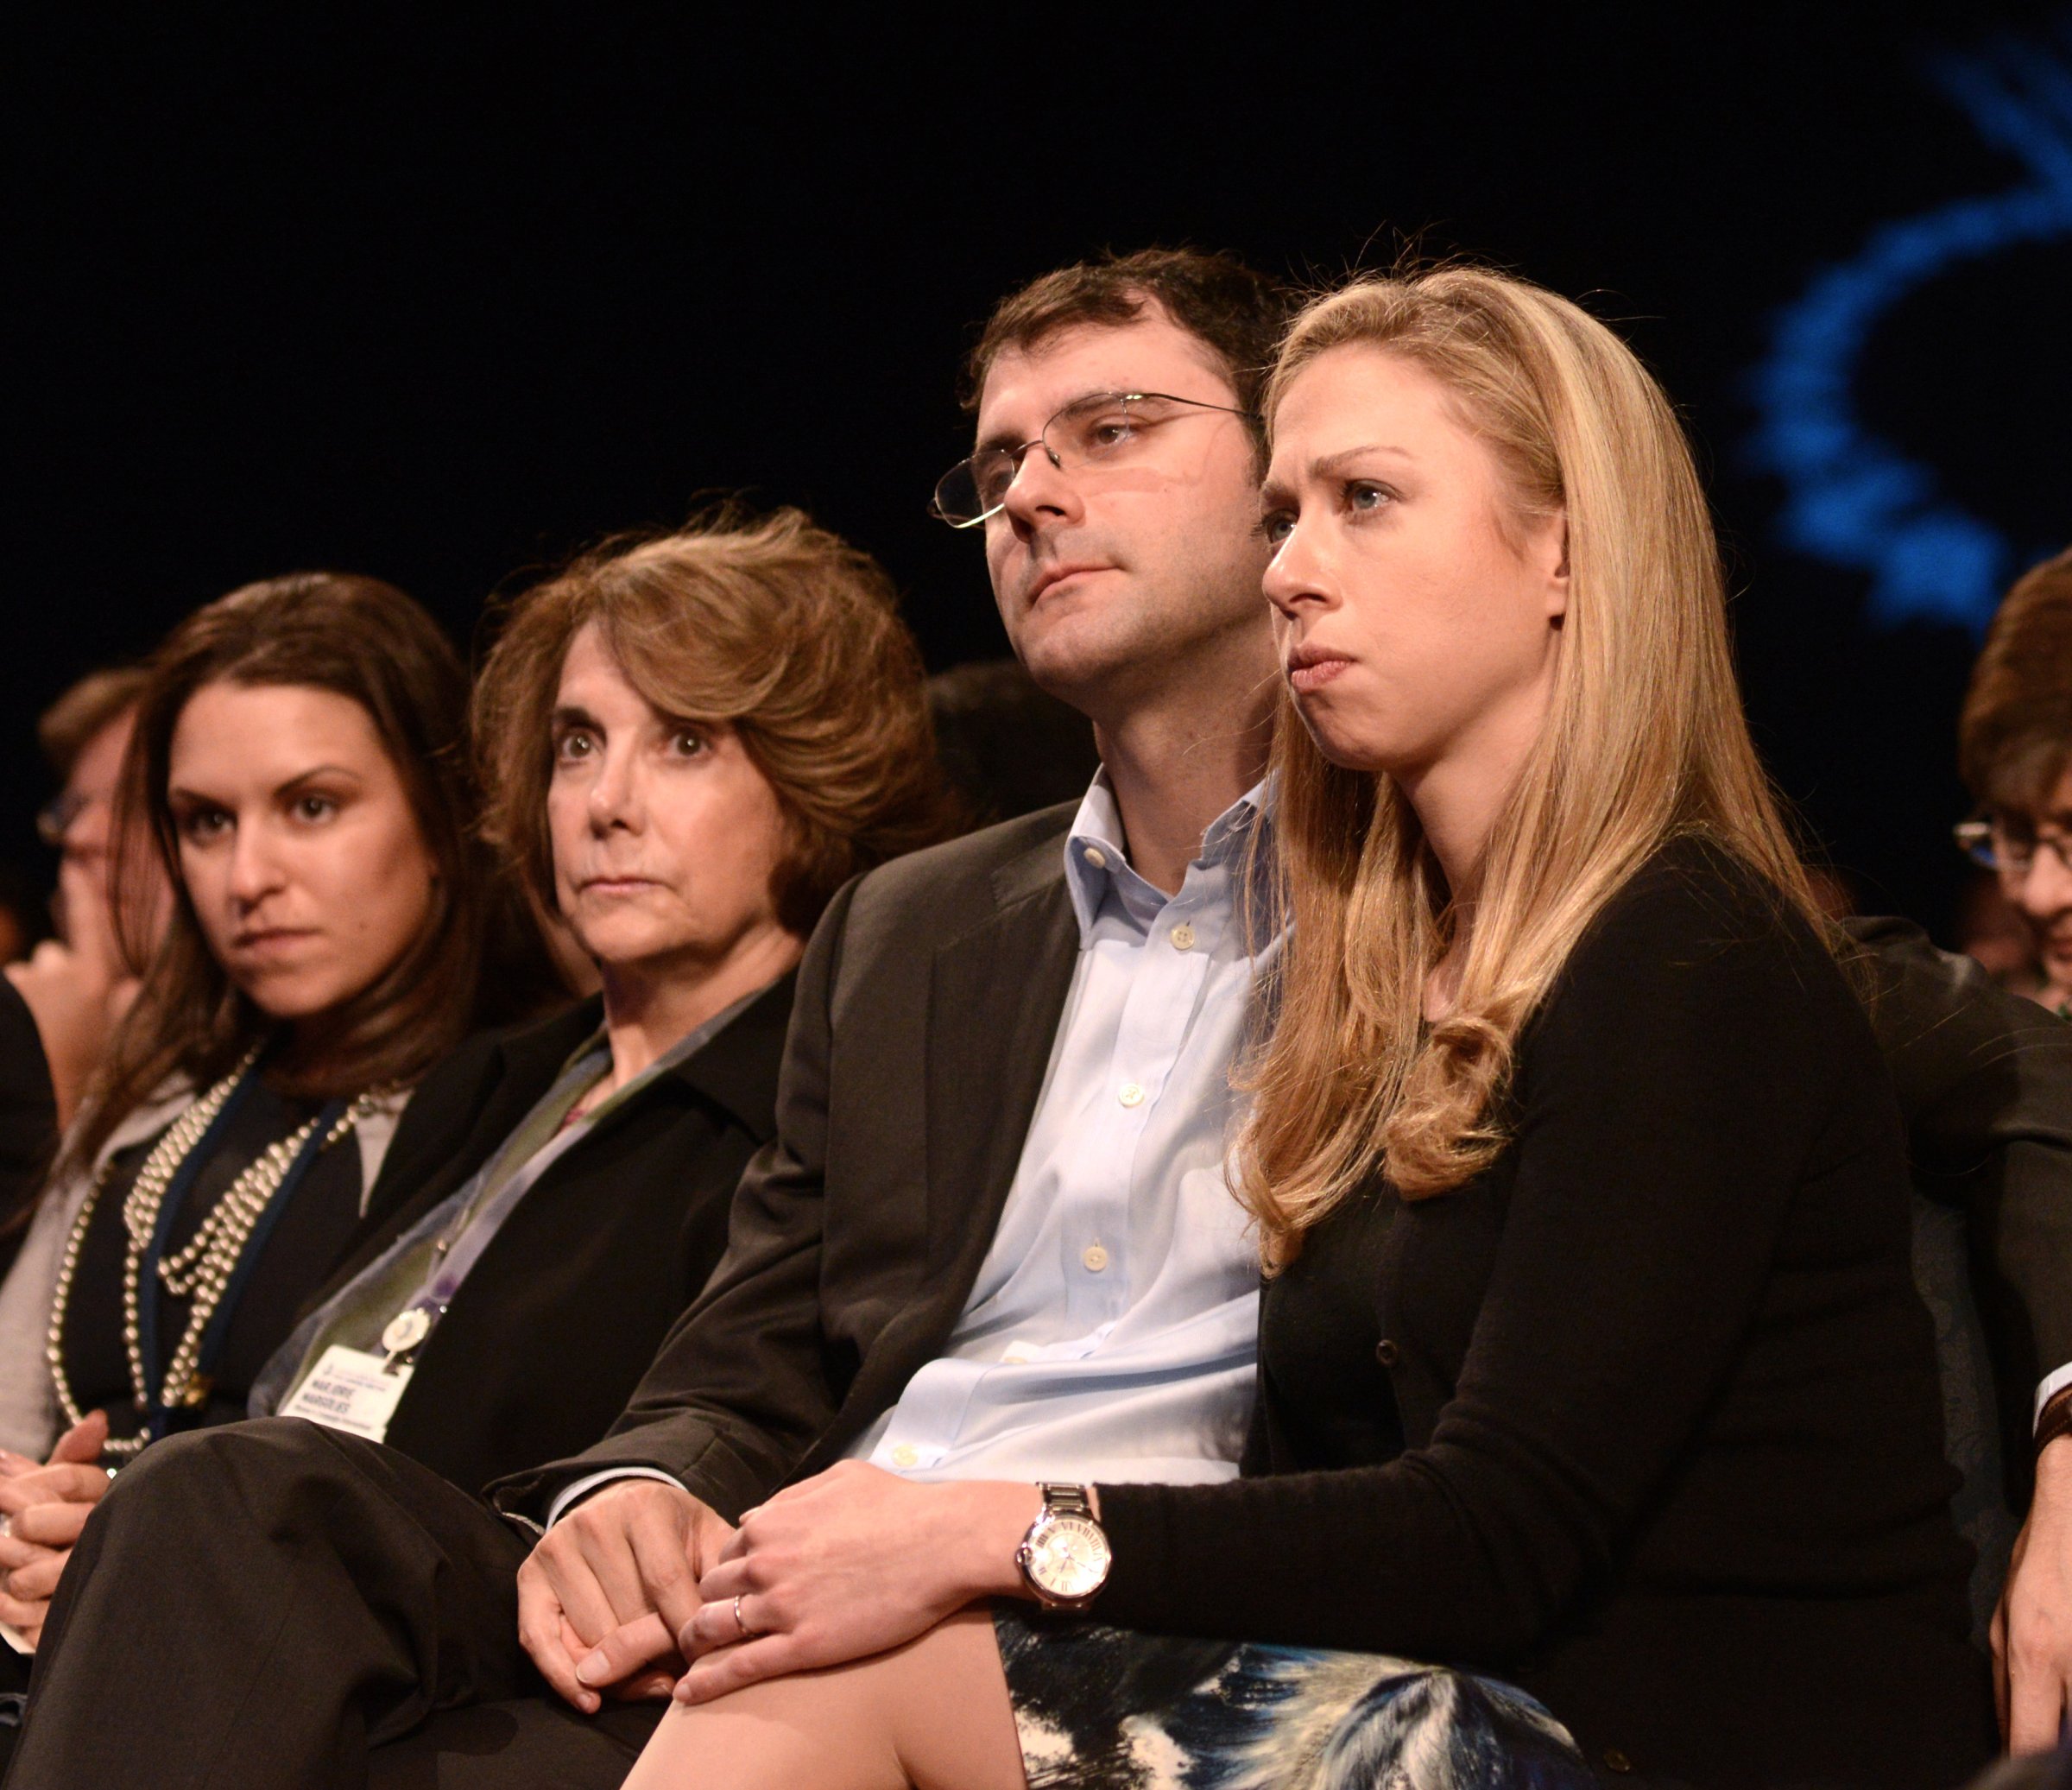 Chelsea Clinton and Marc Mezvinsky attend 2012 Clinton Global Initiative Opening Session at the Sheraton Hote in New York on Sept. 23, 2012.